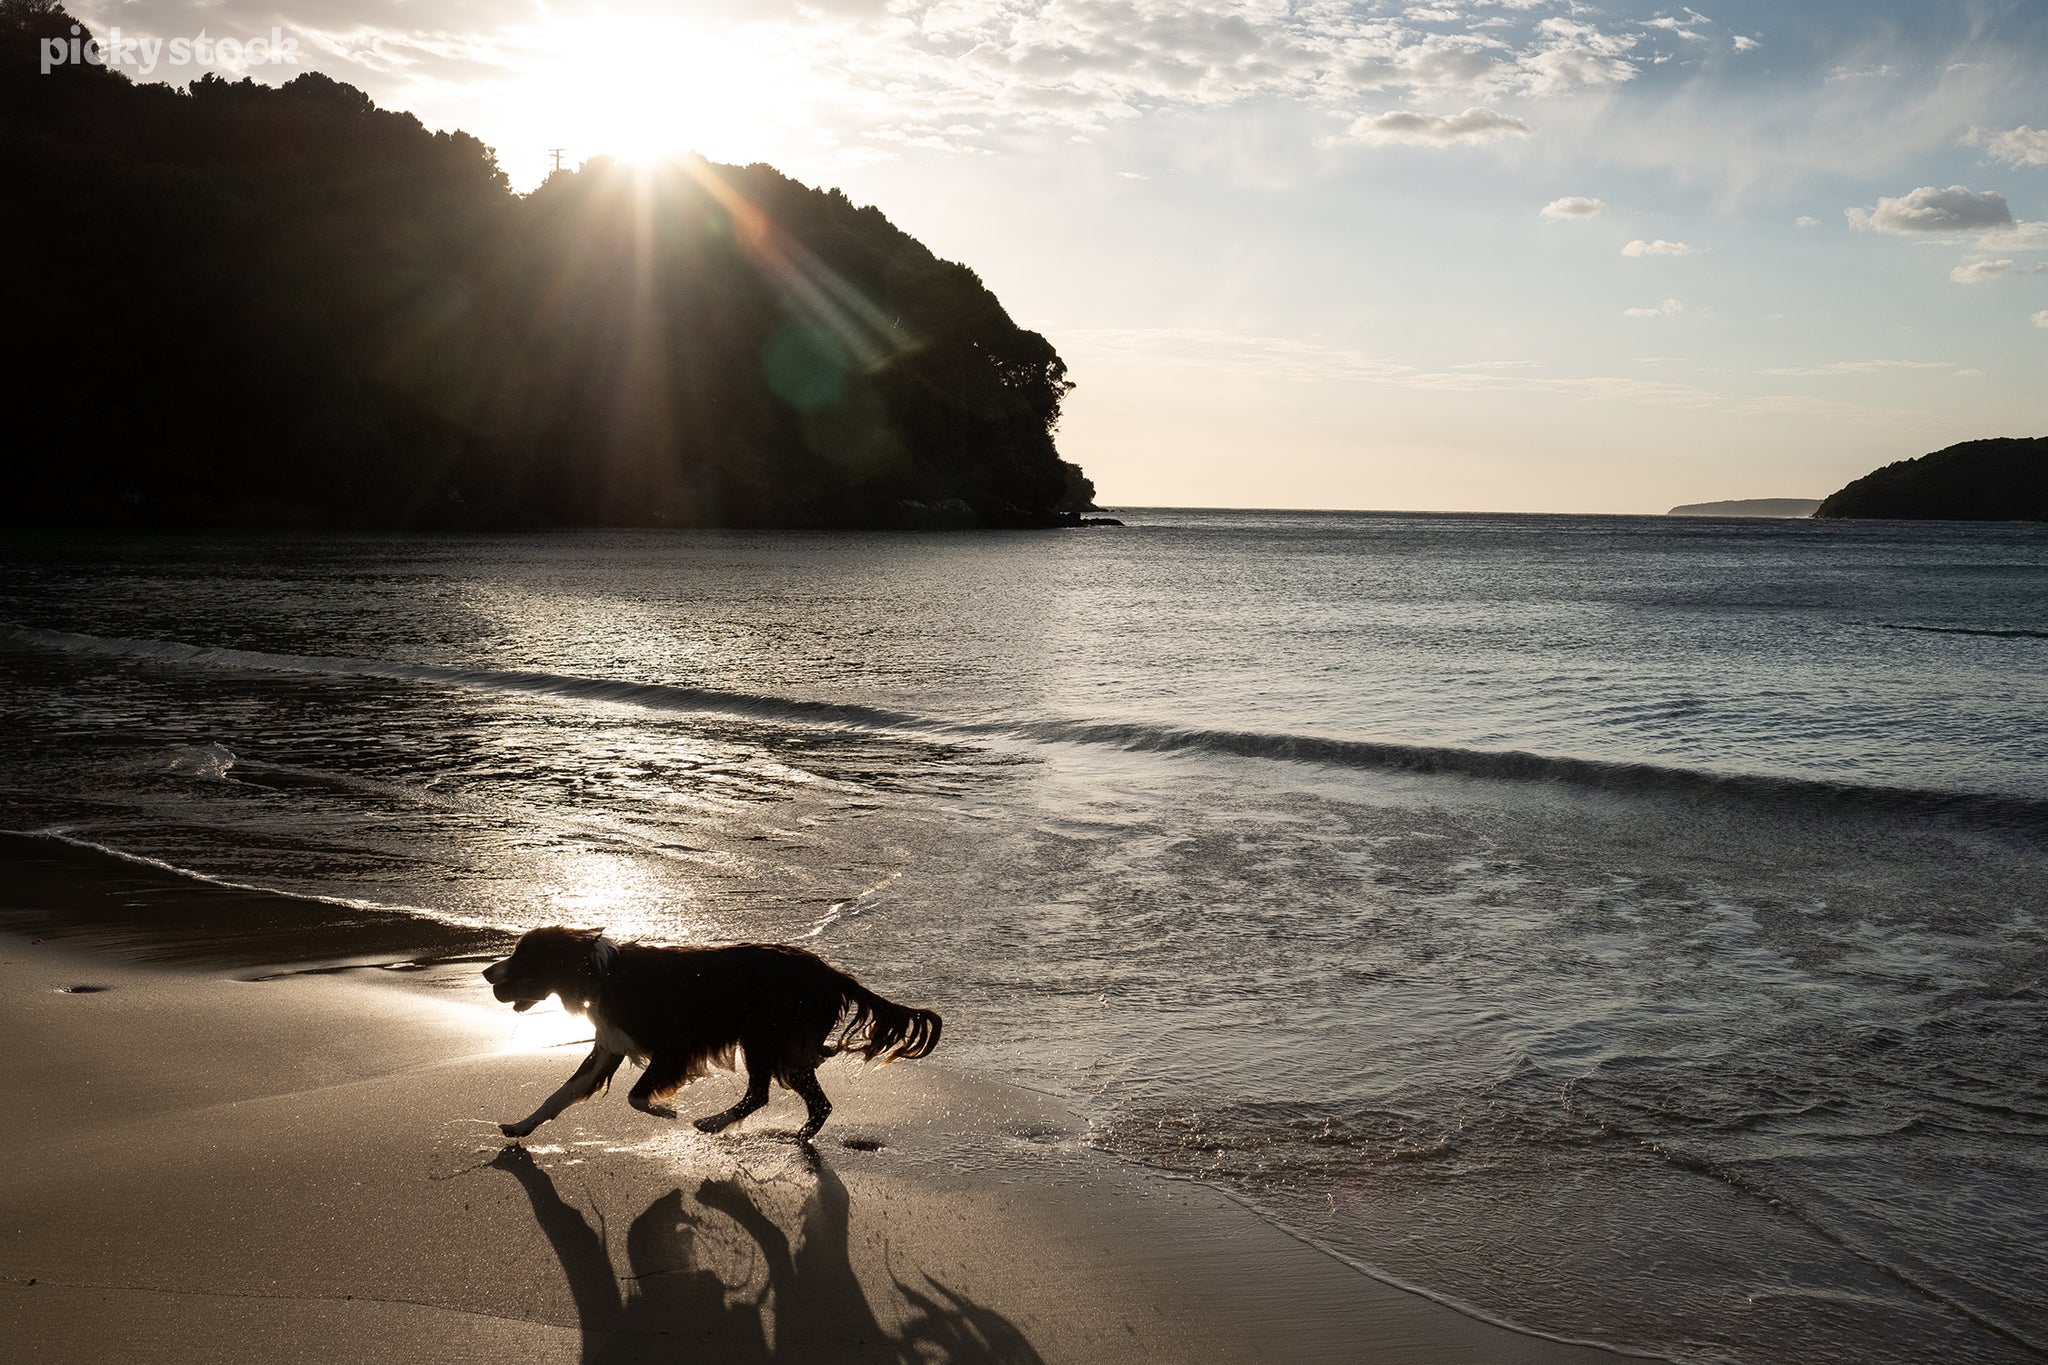 Landscape of a dog running across a beach, waves break against the shore and wash away the indications of their paws. The sun crests over dark green mangroves and trees casting the whole bay in a dark shadow as light glints off the sand.